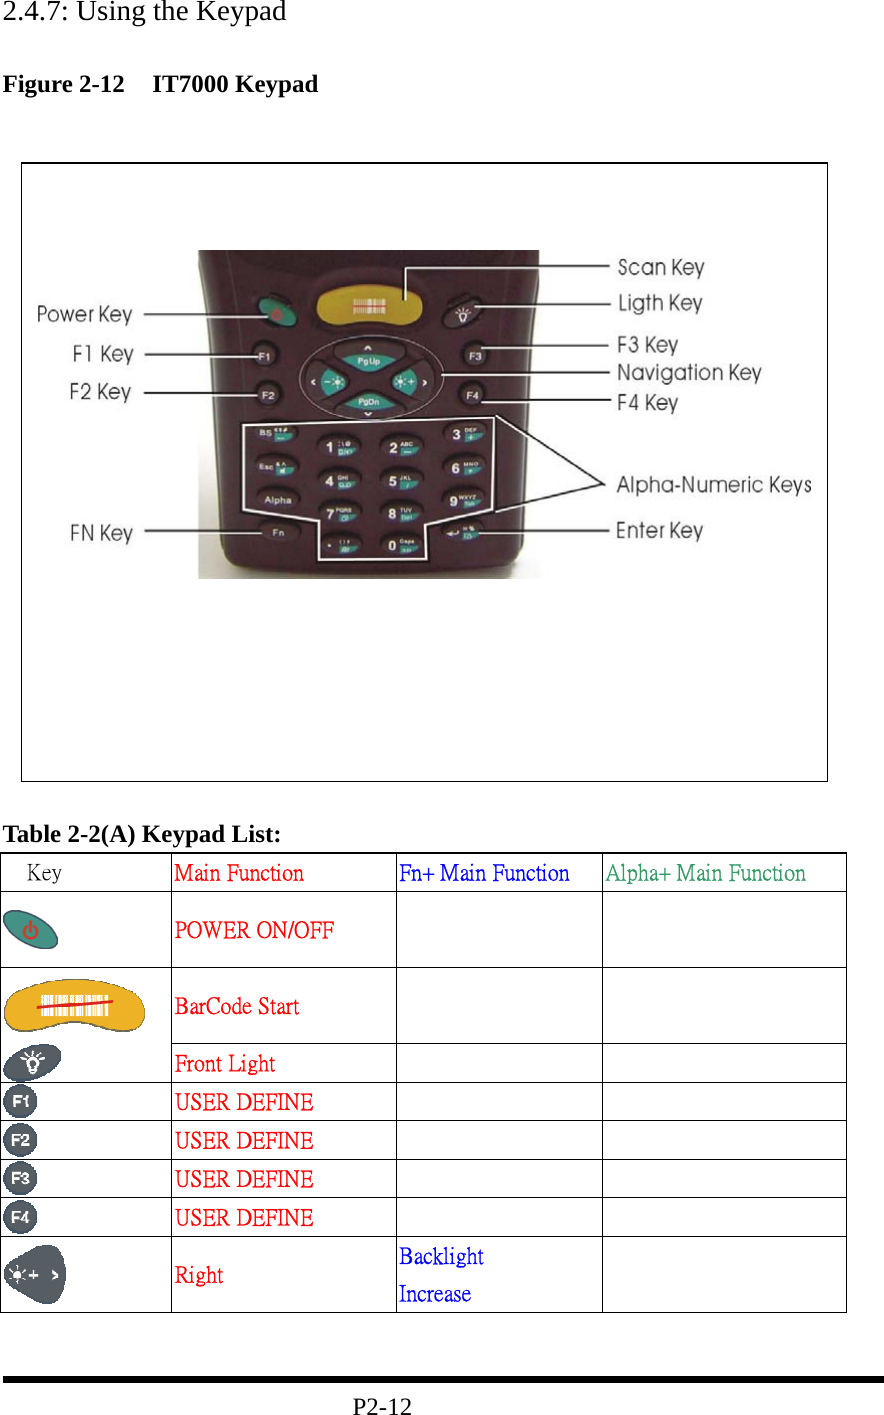 2.4.7: Using the Keypad  Figure 2-12  IT7000 Keypad                      Table 2-2(A) Keypad List:  Key  Main Function  Fn+ Main Function  Alpha+ Main Function  POWER ON/OFF        BarCode Start        Front Light        USER DEFINE        USER DEFINE        USER DEFINE        USER DEFINE        Right  Backlight   Increase                                  P2-12    